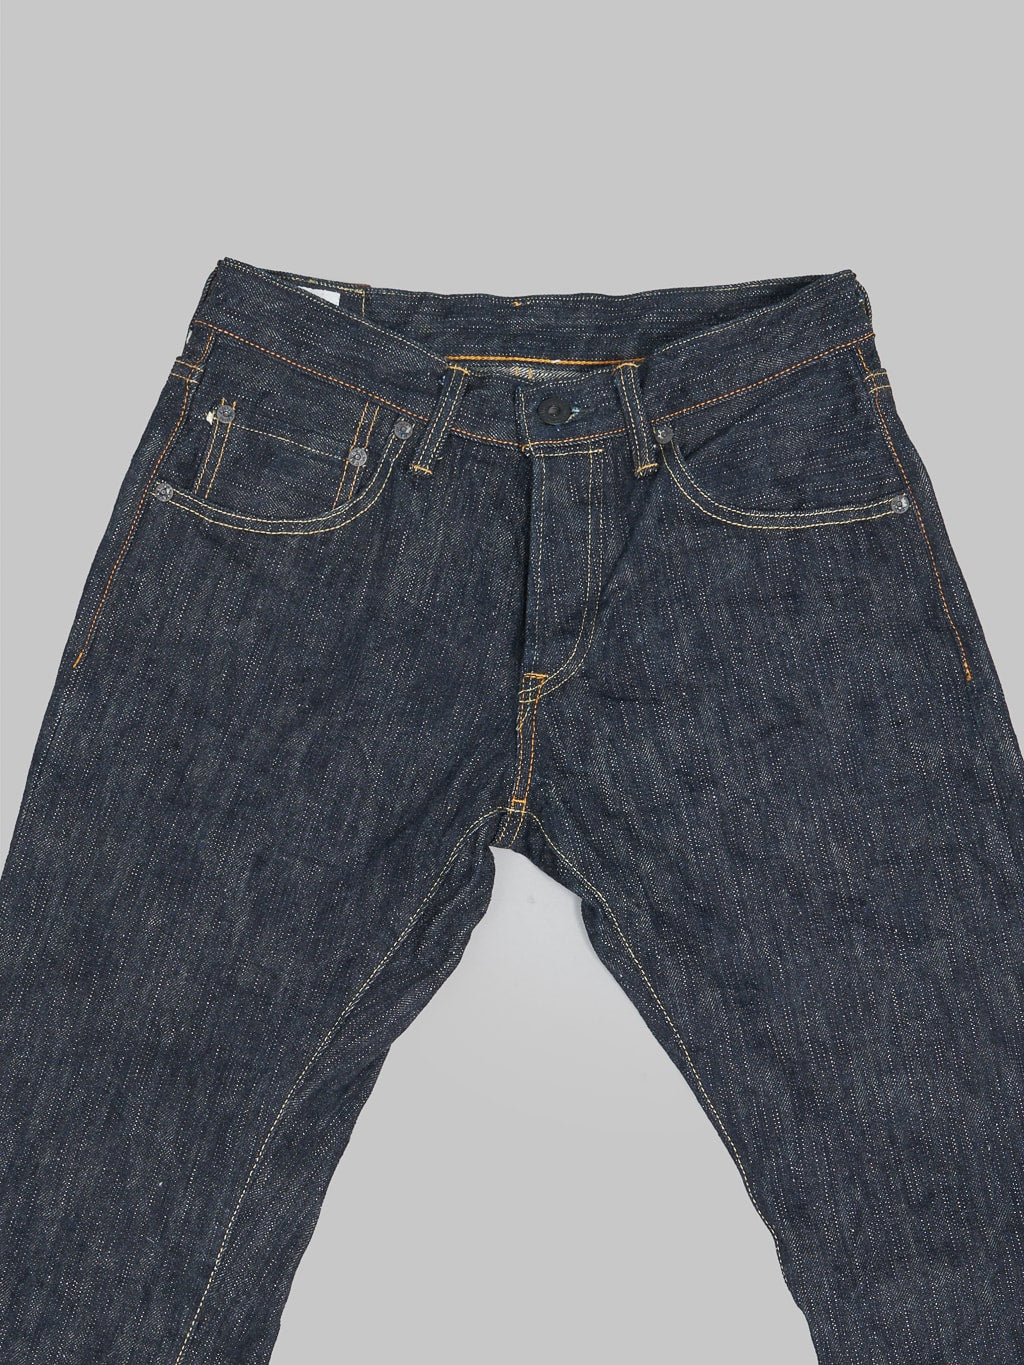 Oni denim kihannen relaxed tapered jeans front view